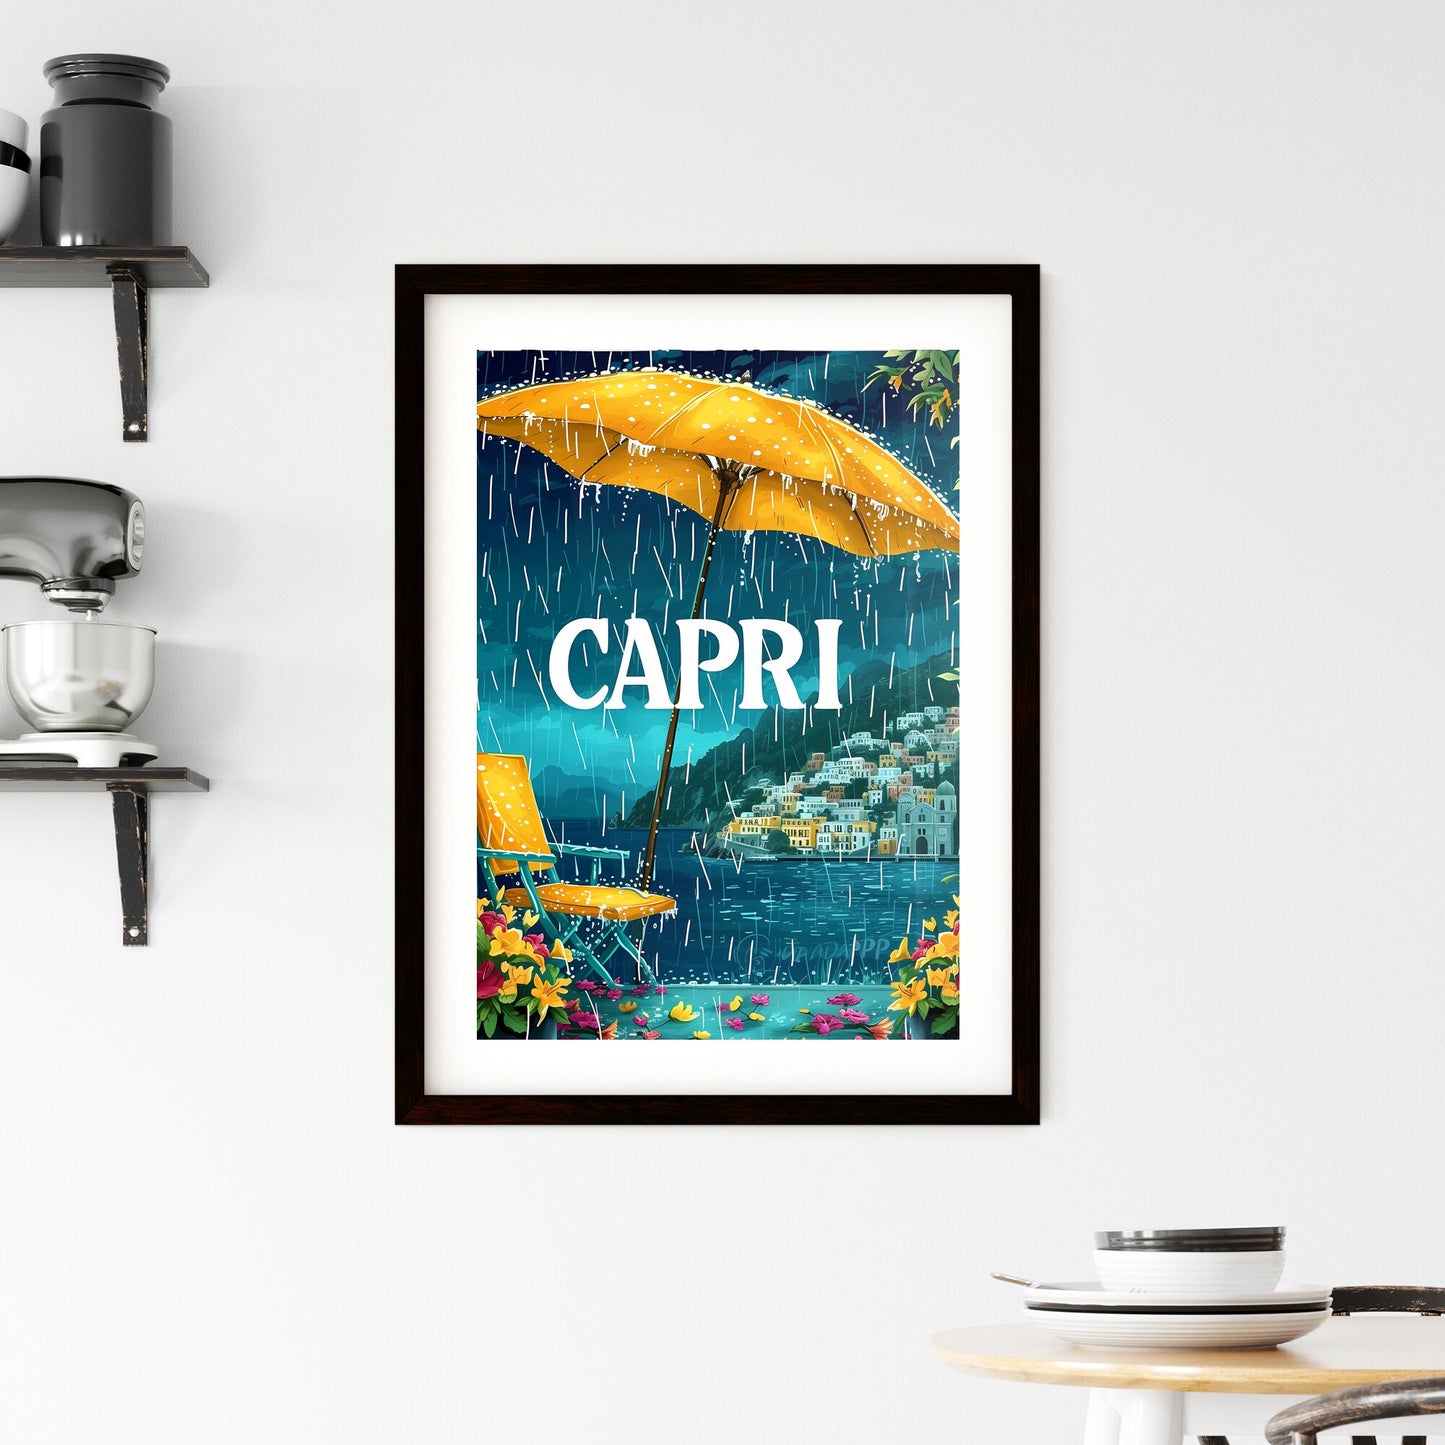 Capri Italy with text CAPRI in bodony font - Art print of a yellow umbrella and chair in the rain Default Title